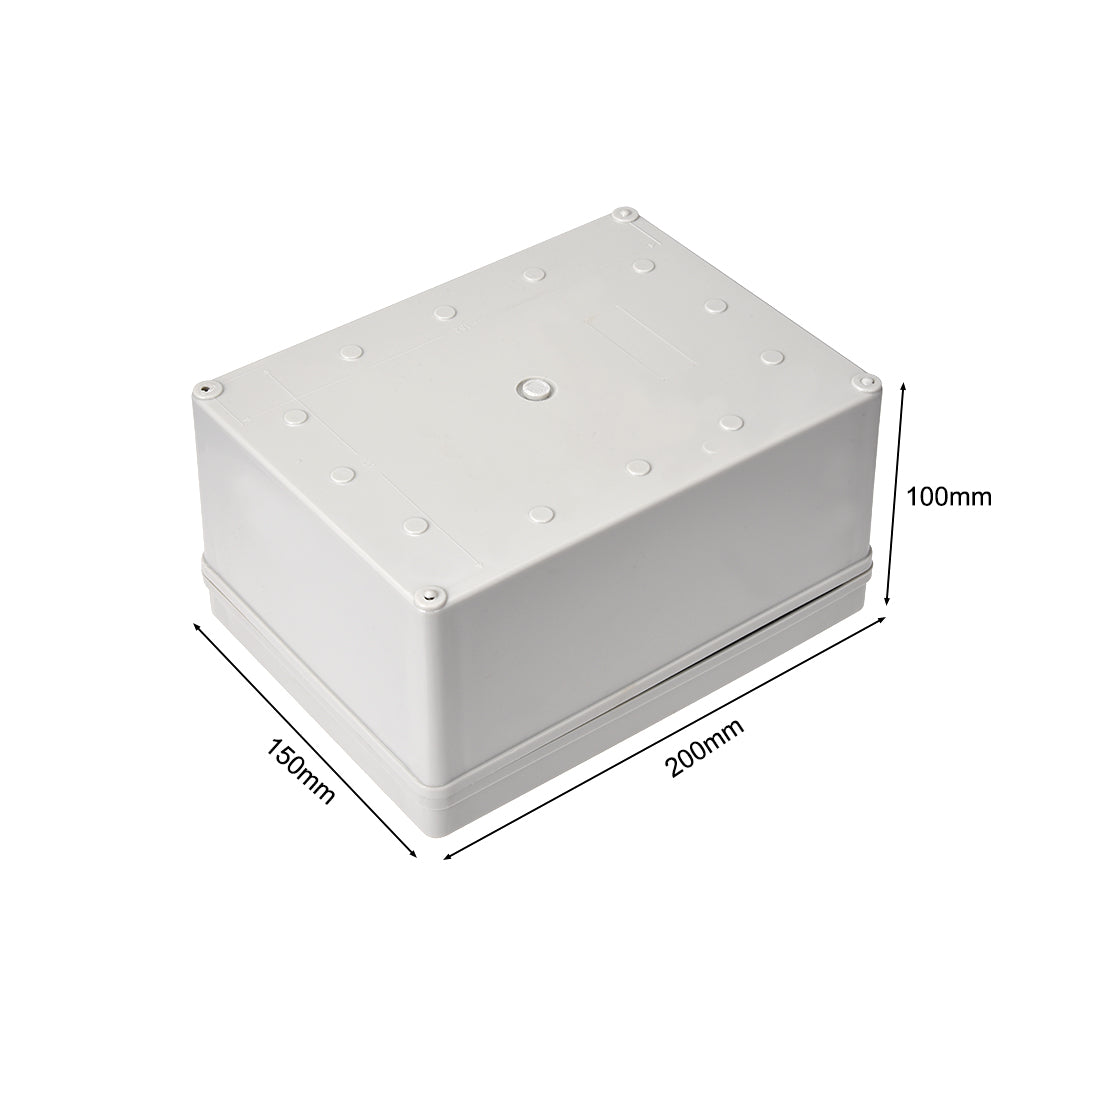 uxcell Uxcell 200mm x 150mm x 100mm Dustproof IP65 Junction Box DIY Case Enclosure Gray